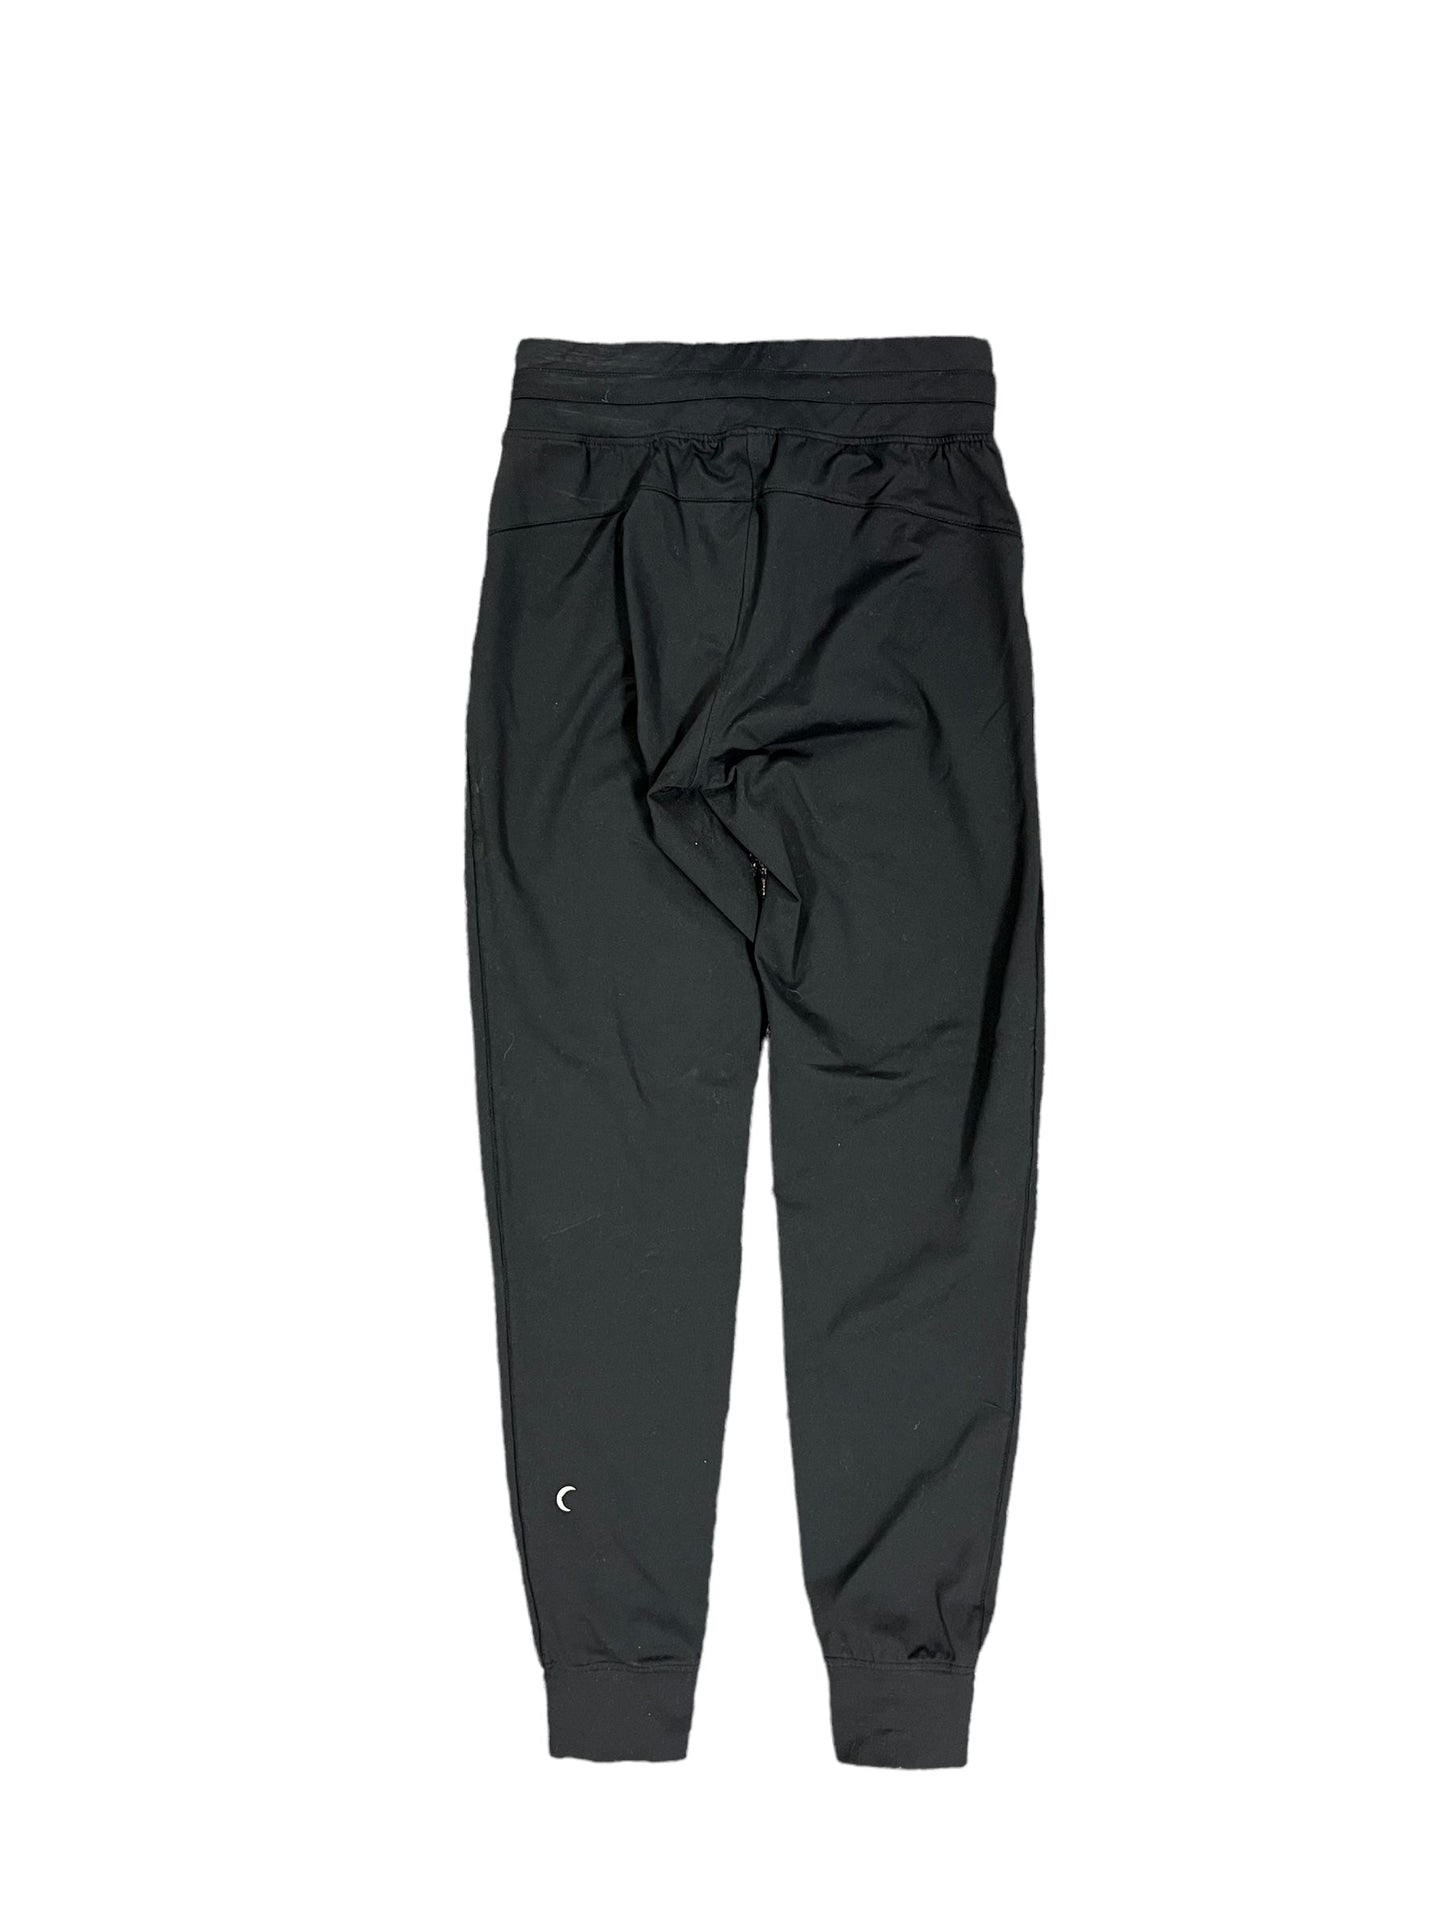 Athletic Pants By Zyia  Size: L